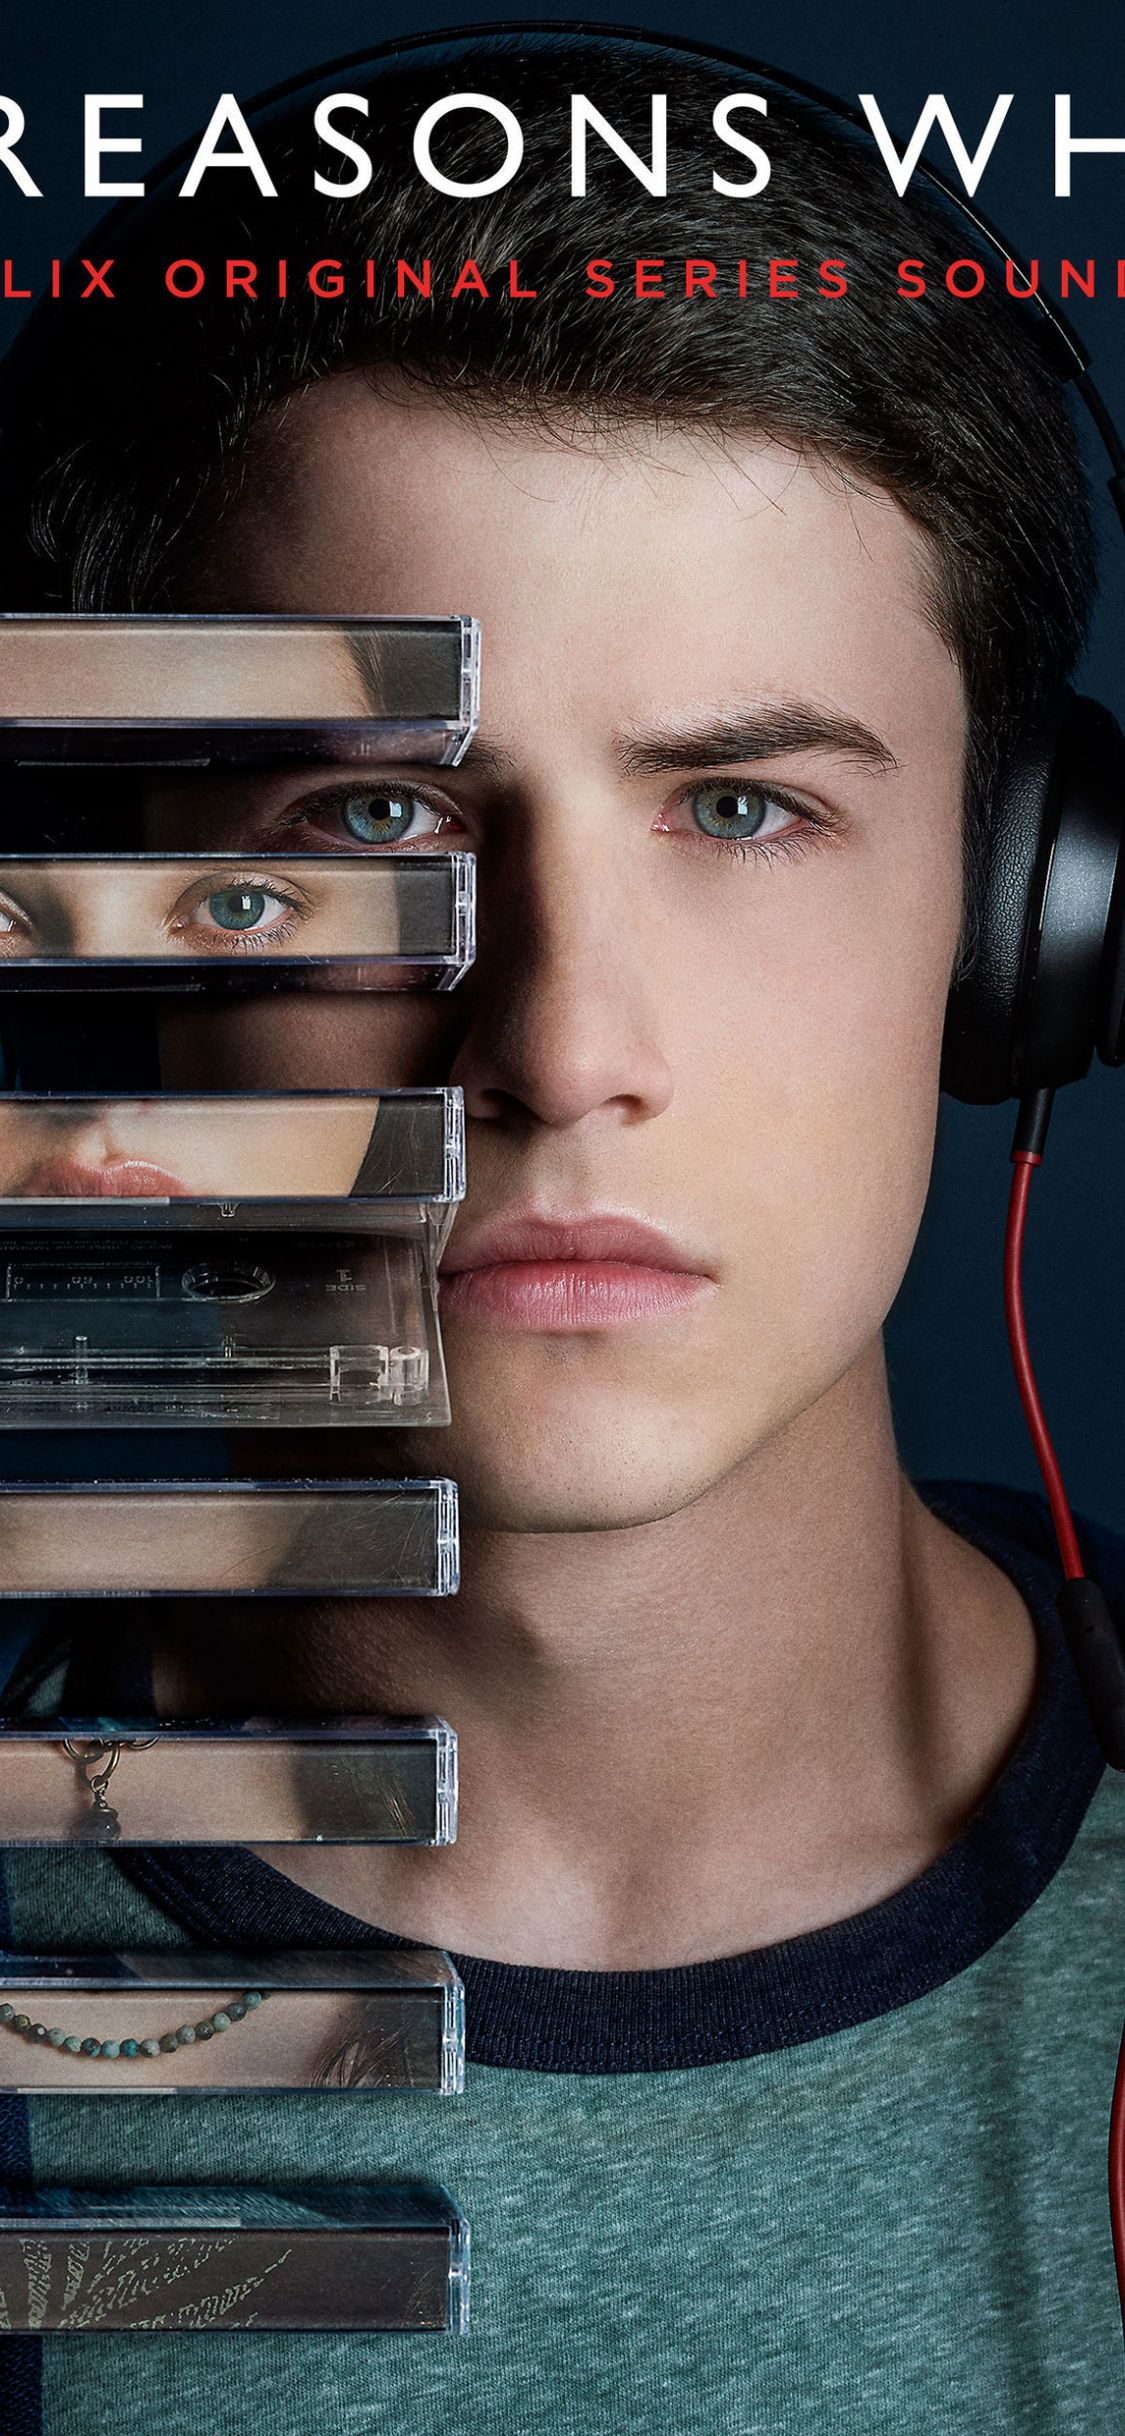 Download 1125x2436 wallpaper 13 reasons why, dylan minnette, 2018